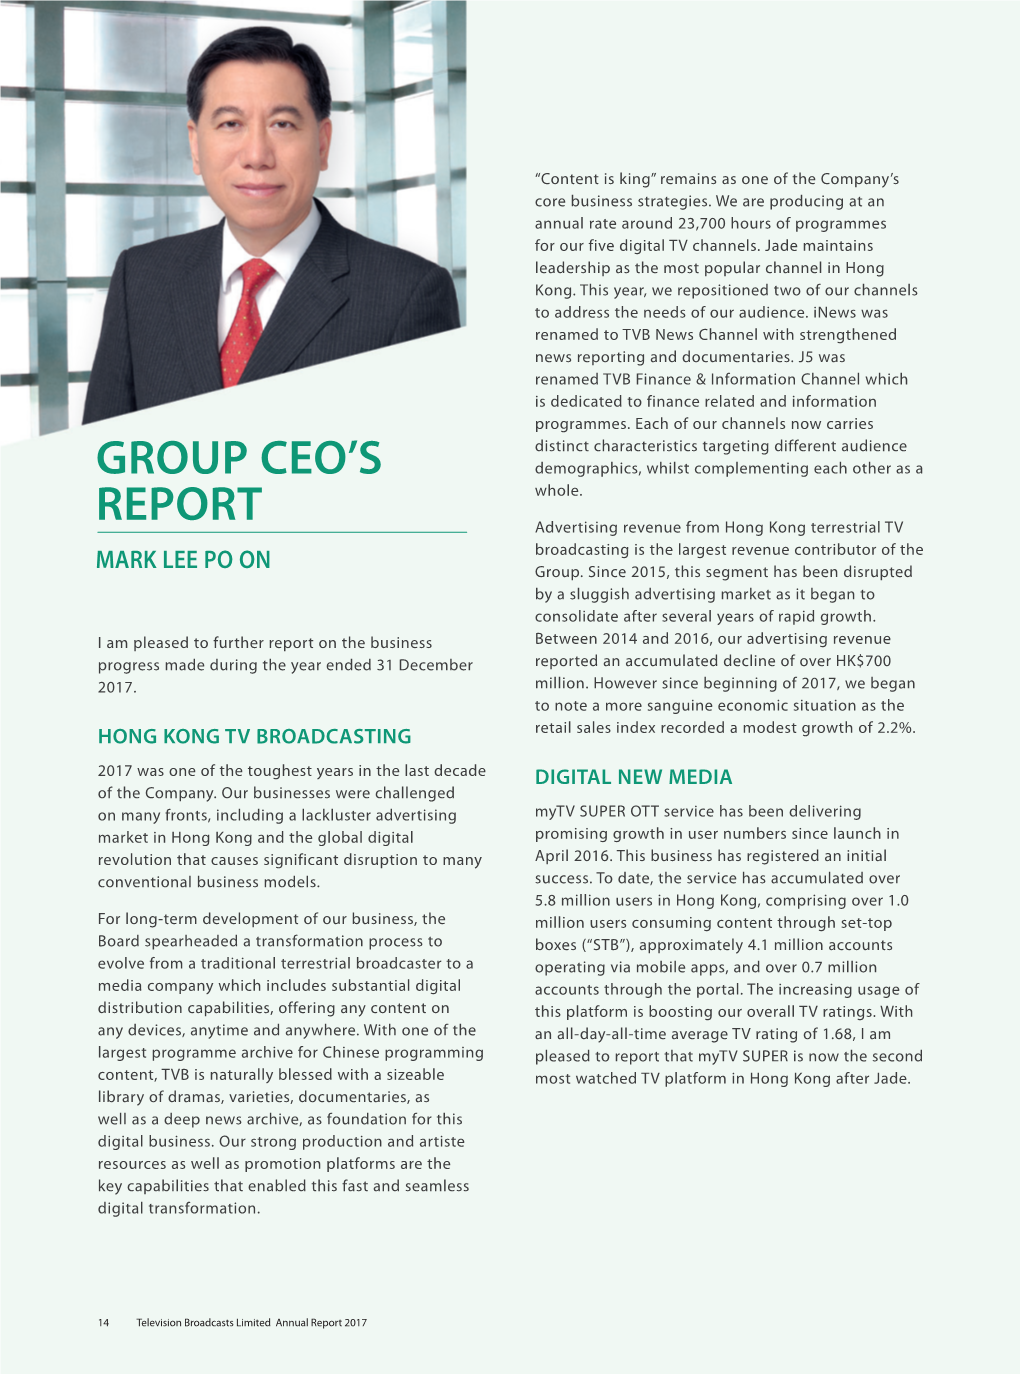 Group Ceo's Report